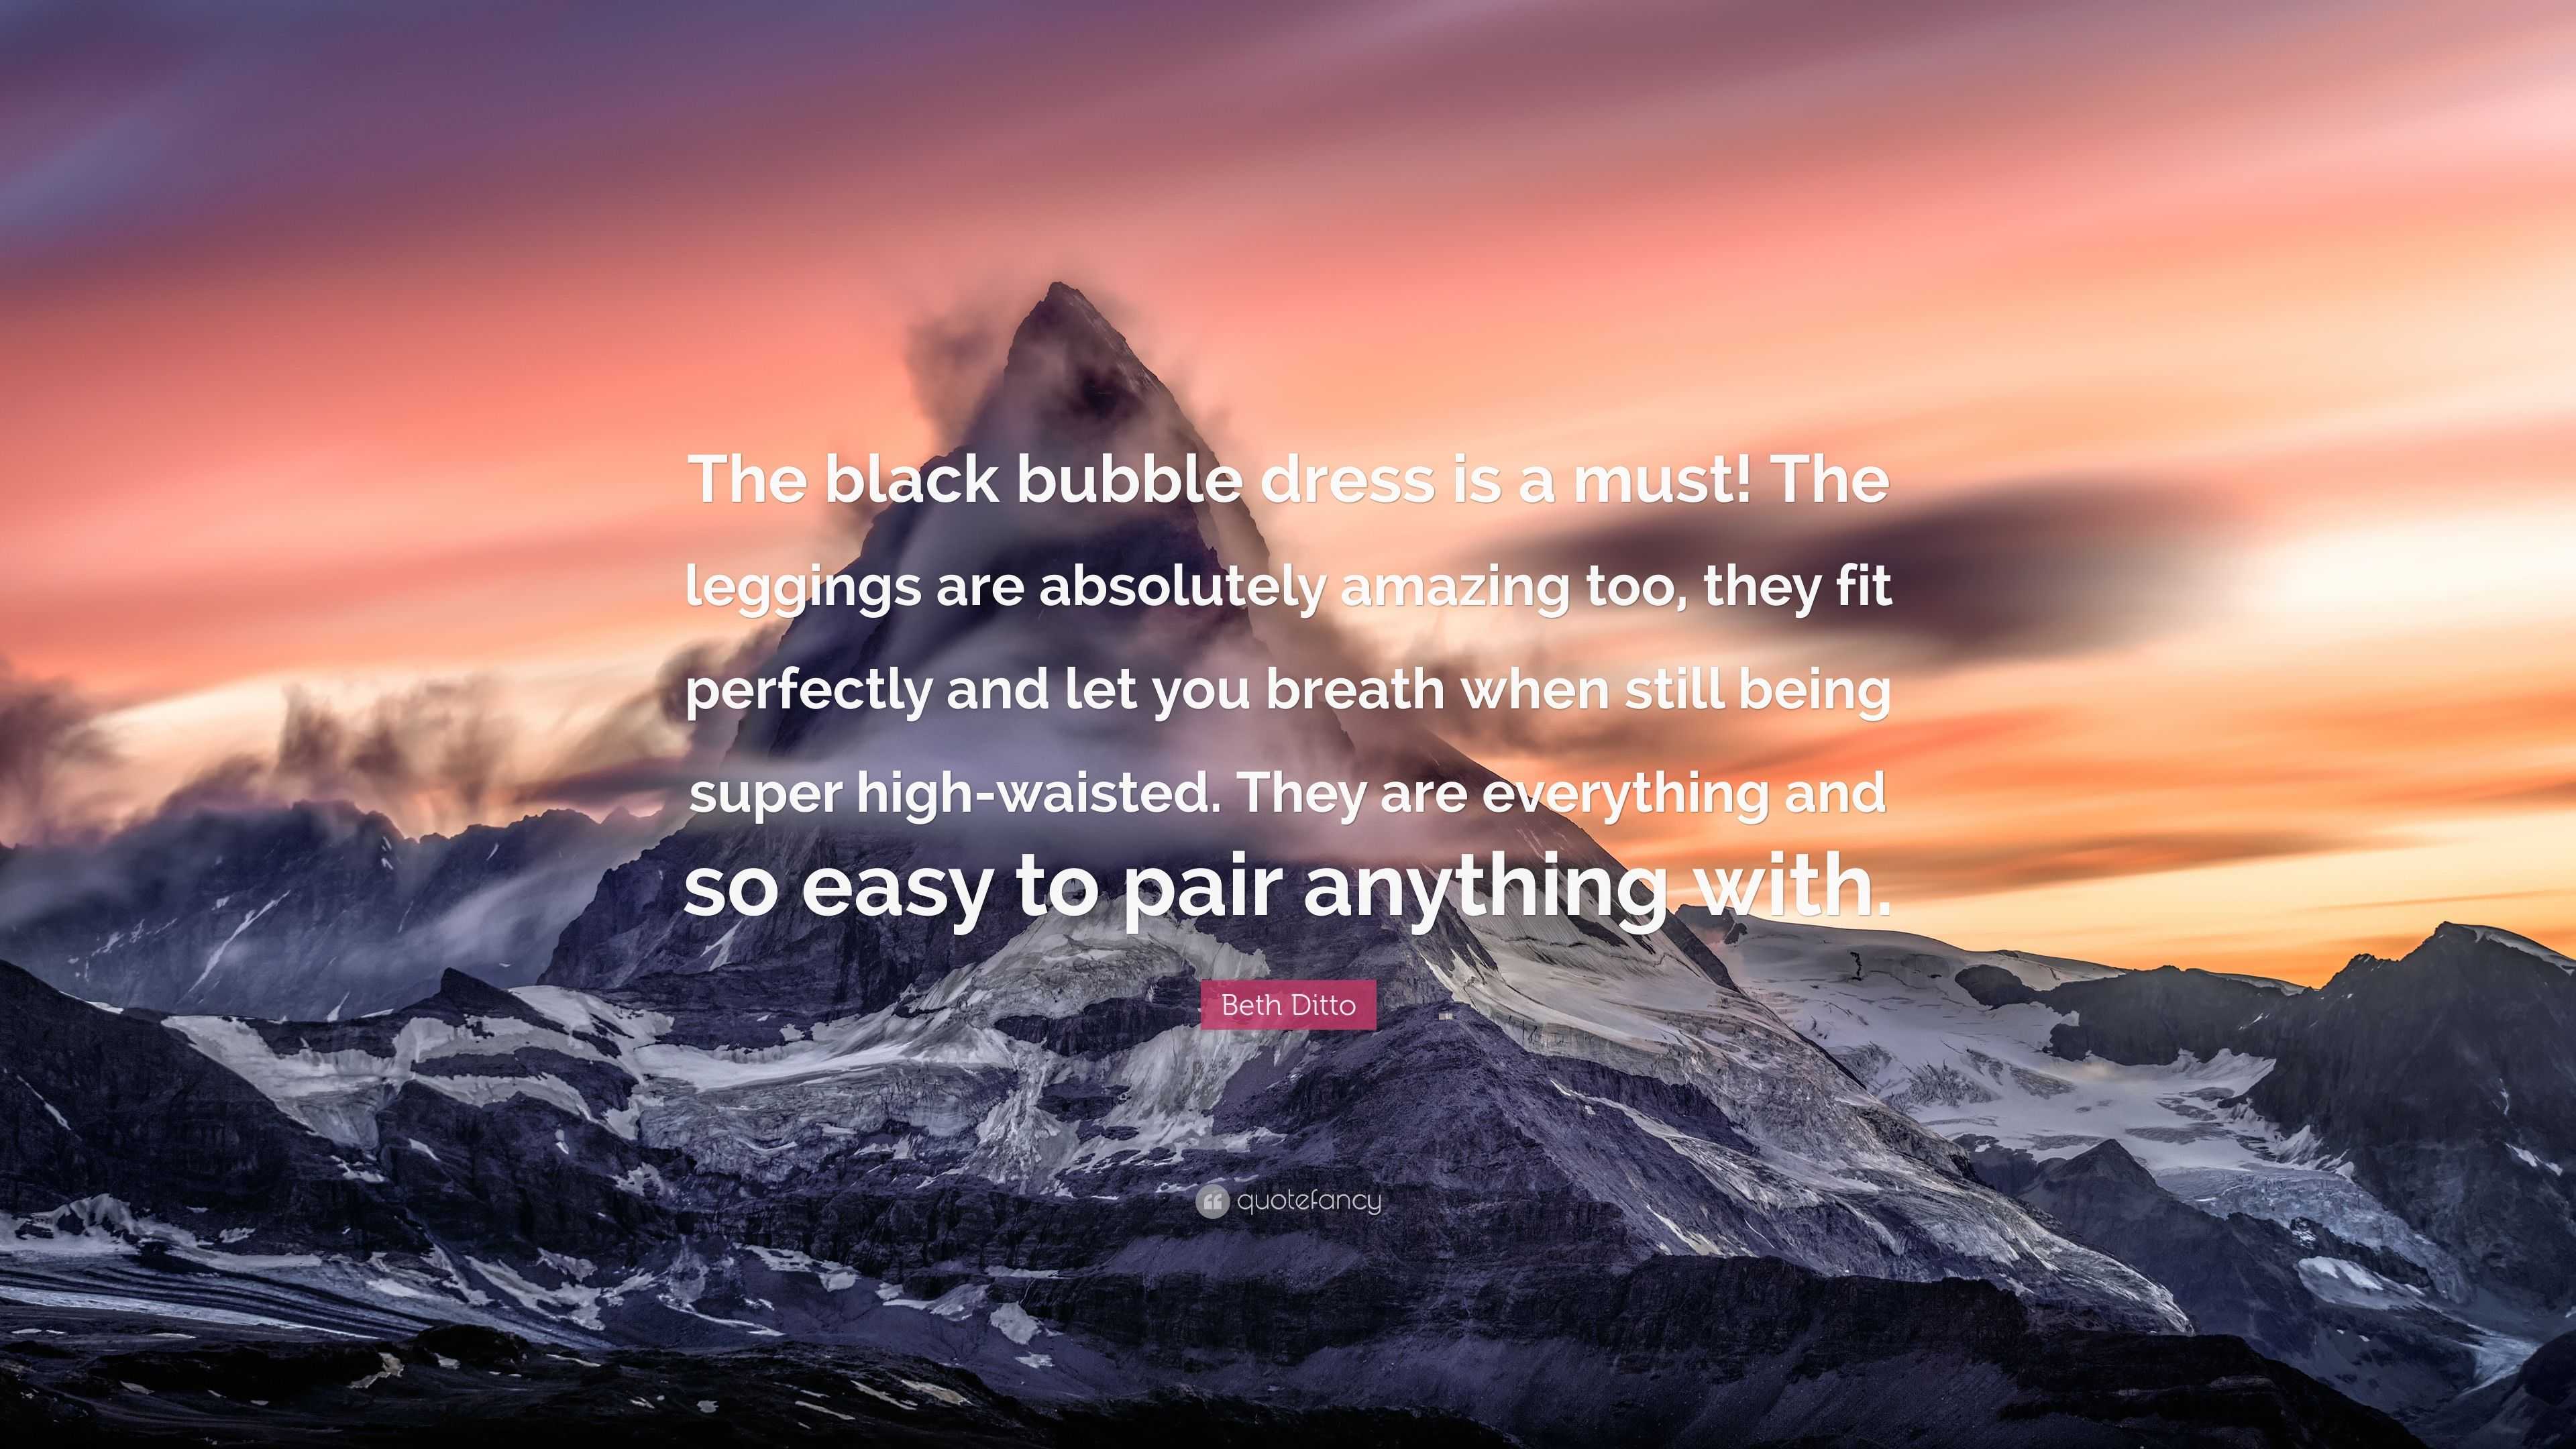 https://quotefancy.com/media/wallpaper/3840x2160/4186447-Beth-Ditto-Quote-The-black-bubble-dress-is-a-must-The-leggings-are.jpg